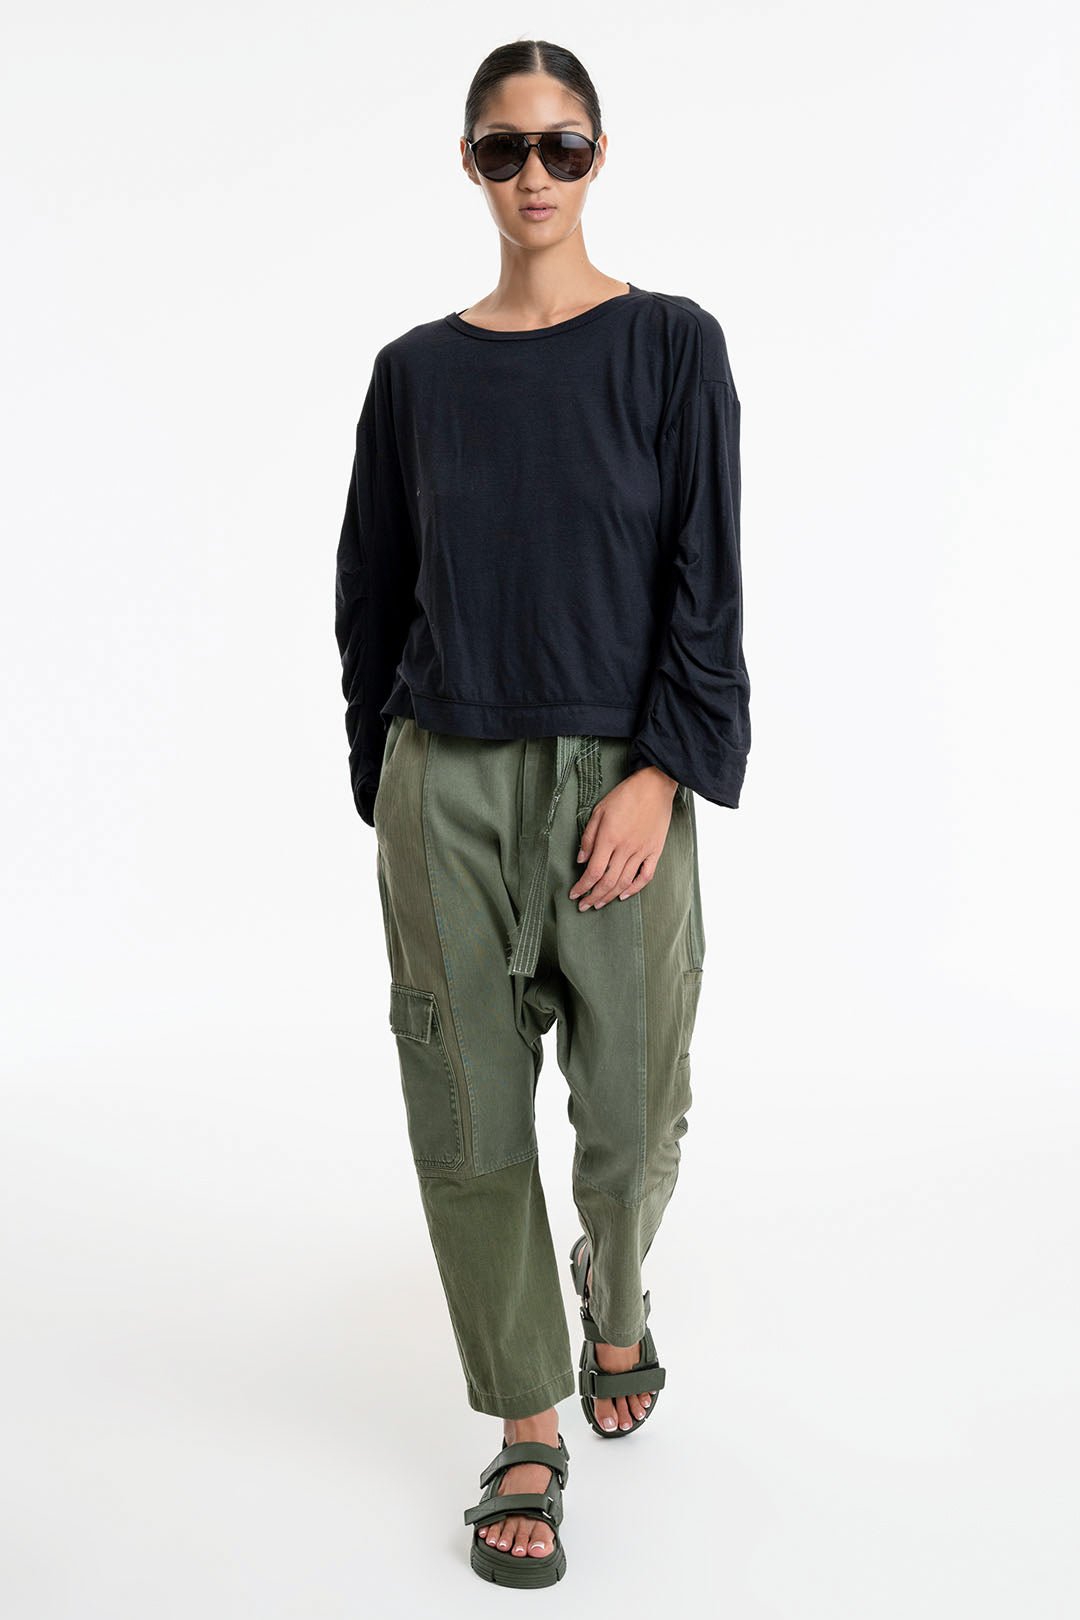 LOVE NOT WAR DROP CROTCH PANT, ARMY – Burning Torch Online Boutique